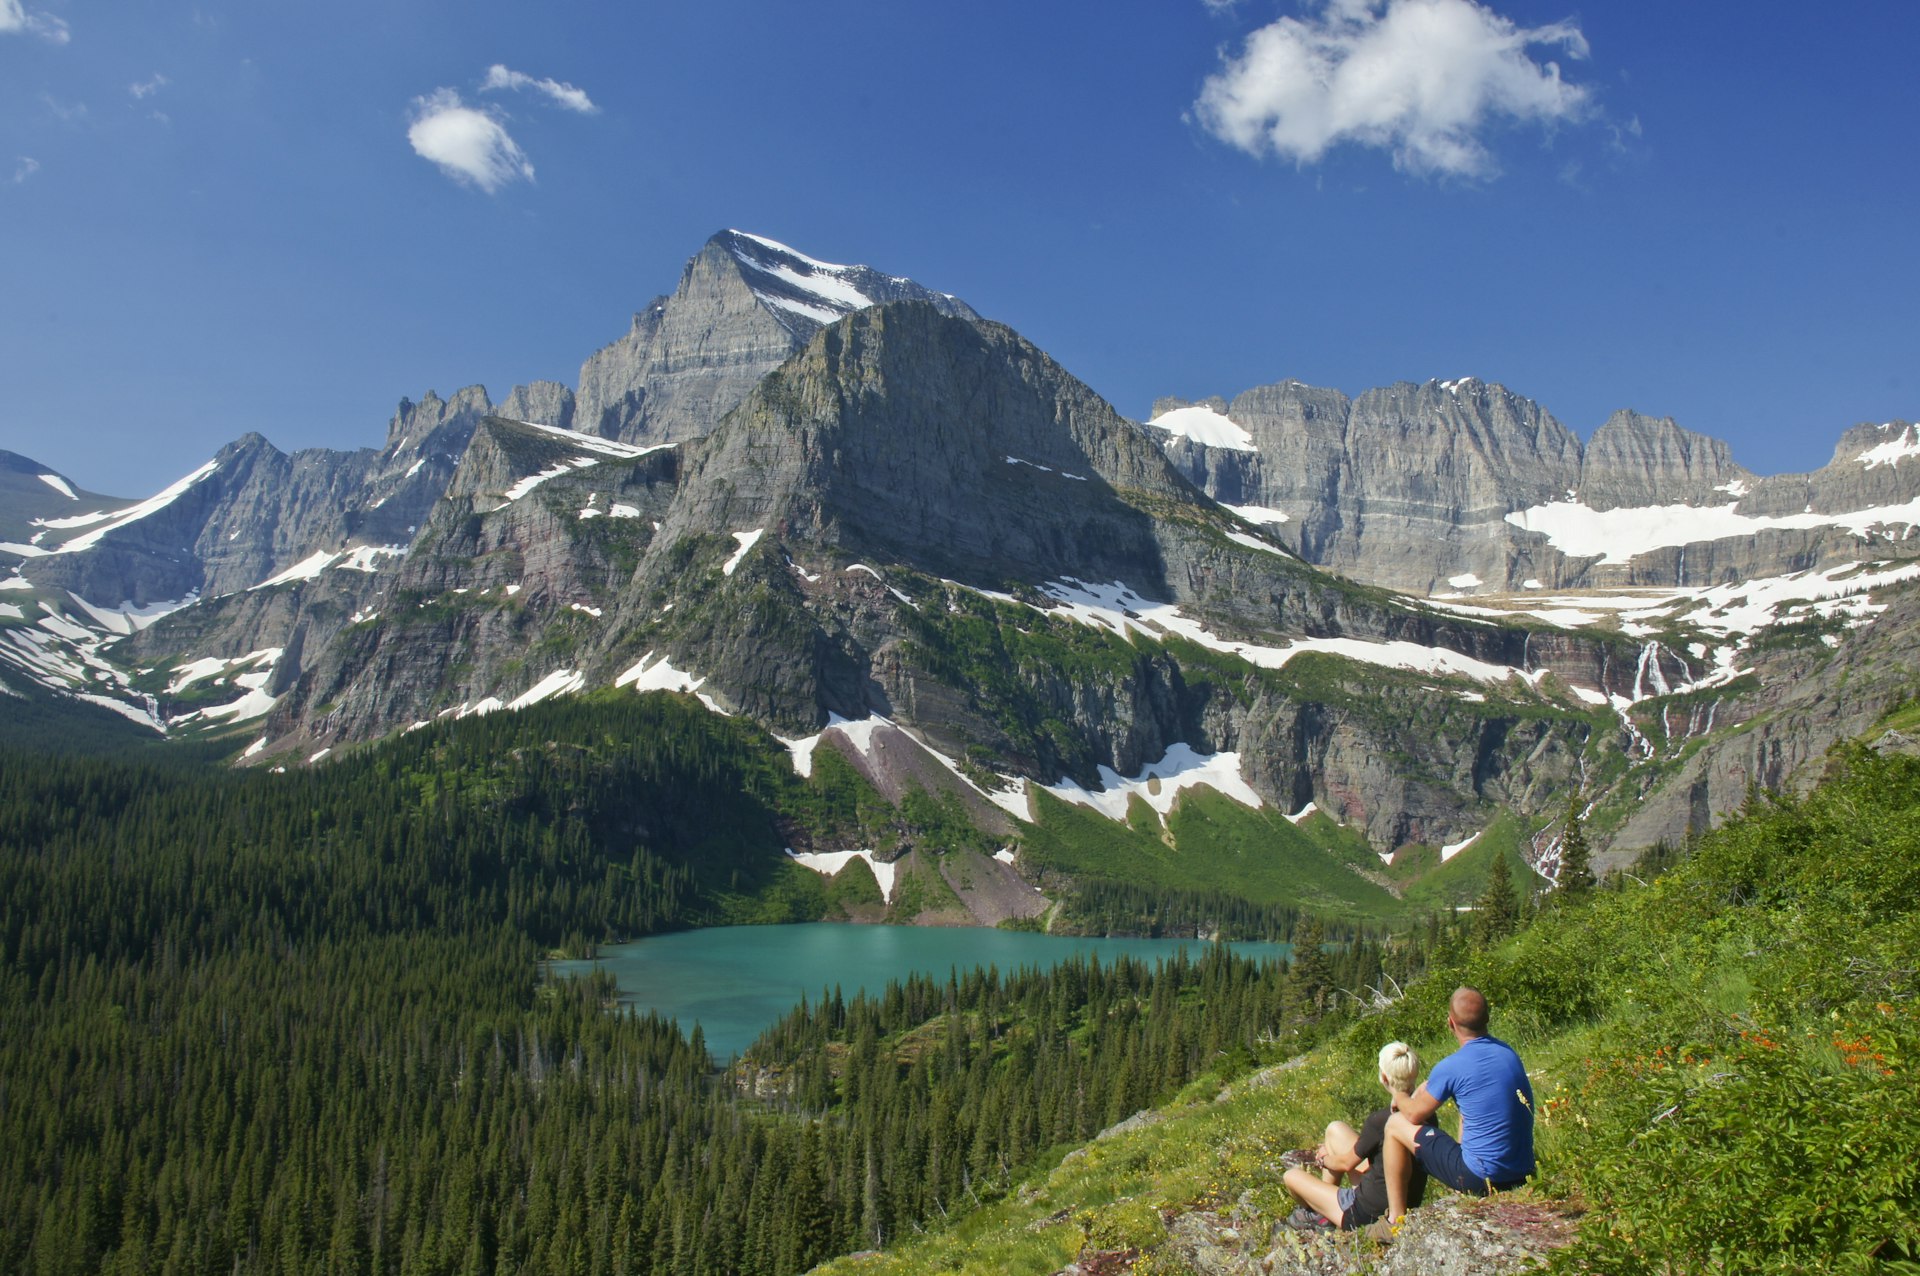 Couple enjoying the view in Glacier National Park